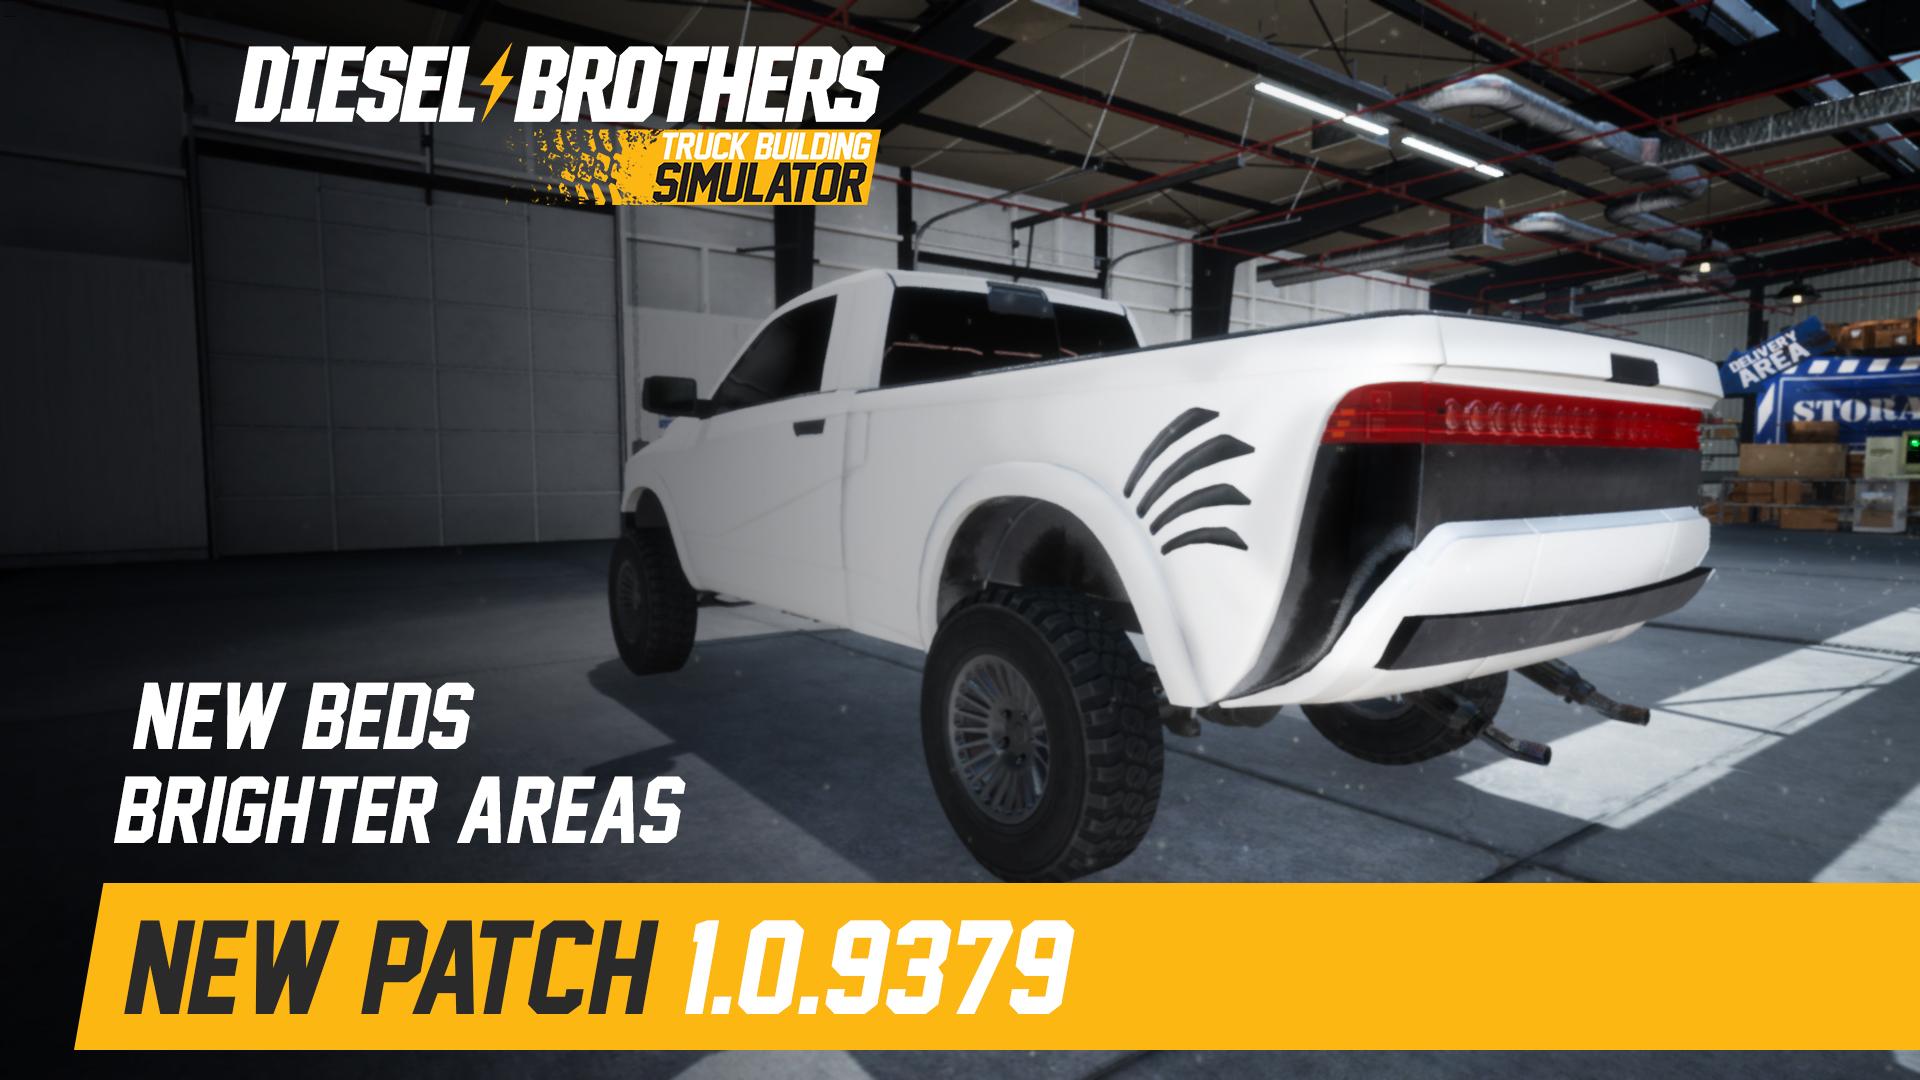 Diesel Brothers: Truck Building Simulator - Patch 1.0.9379